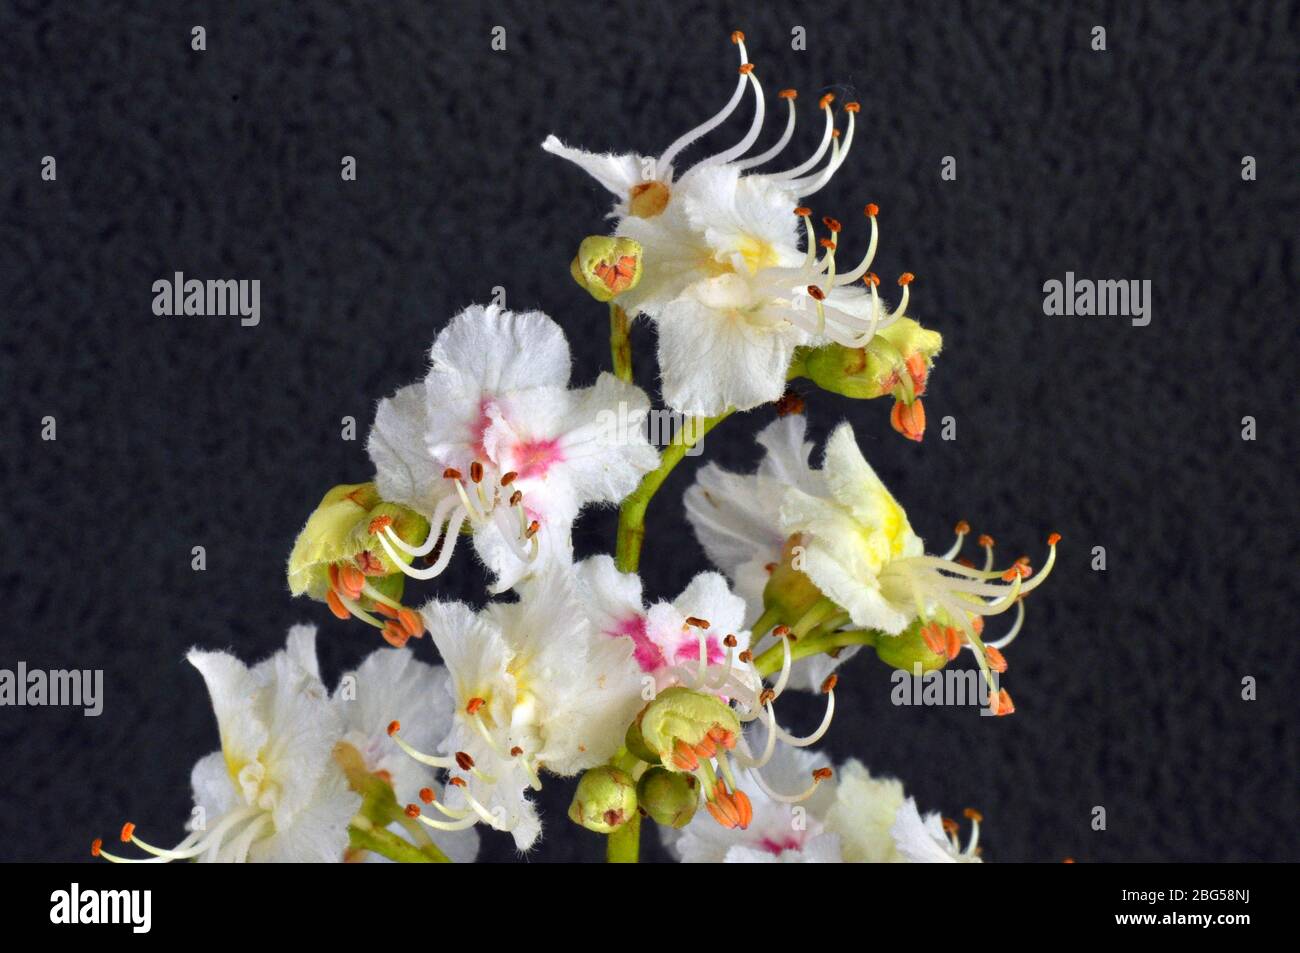 Horse chestnut (Aesculus hippocastanum) flower,pink white petals,white stamen with orange tips,yellow green sepals, close up, May, Somerset.UK Stock Photo